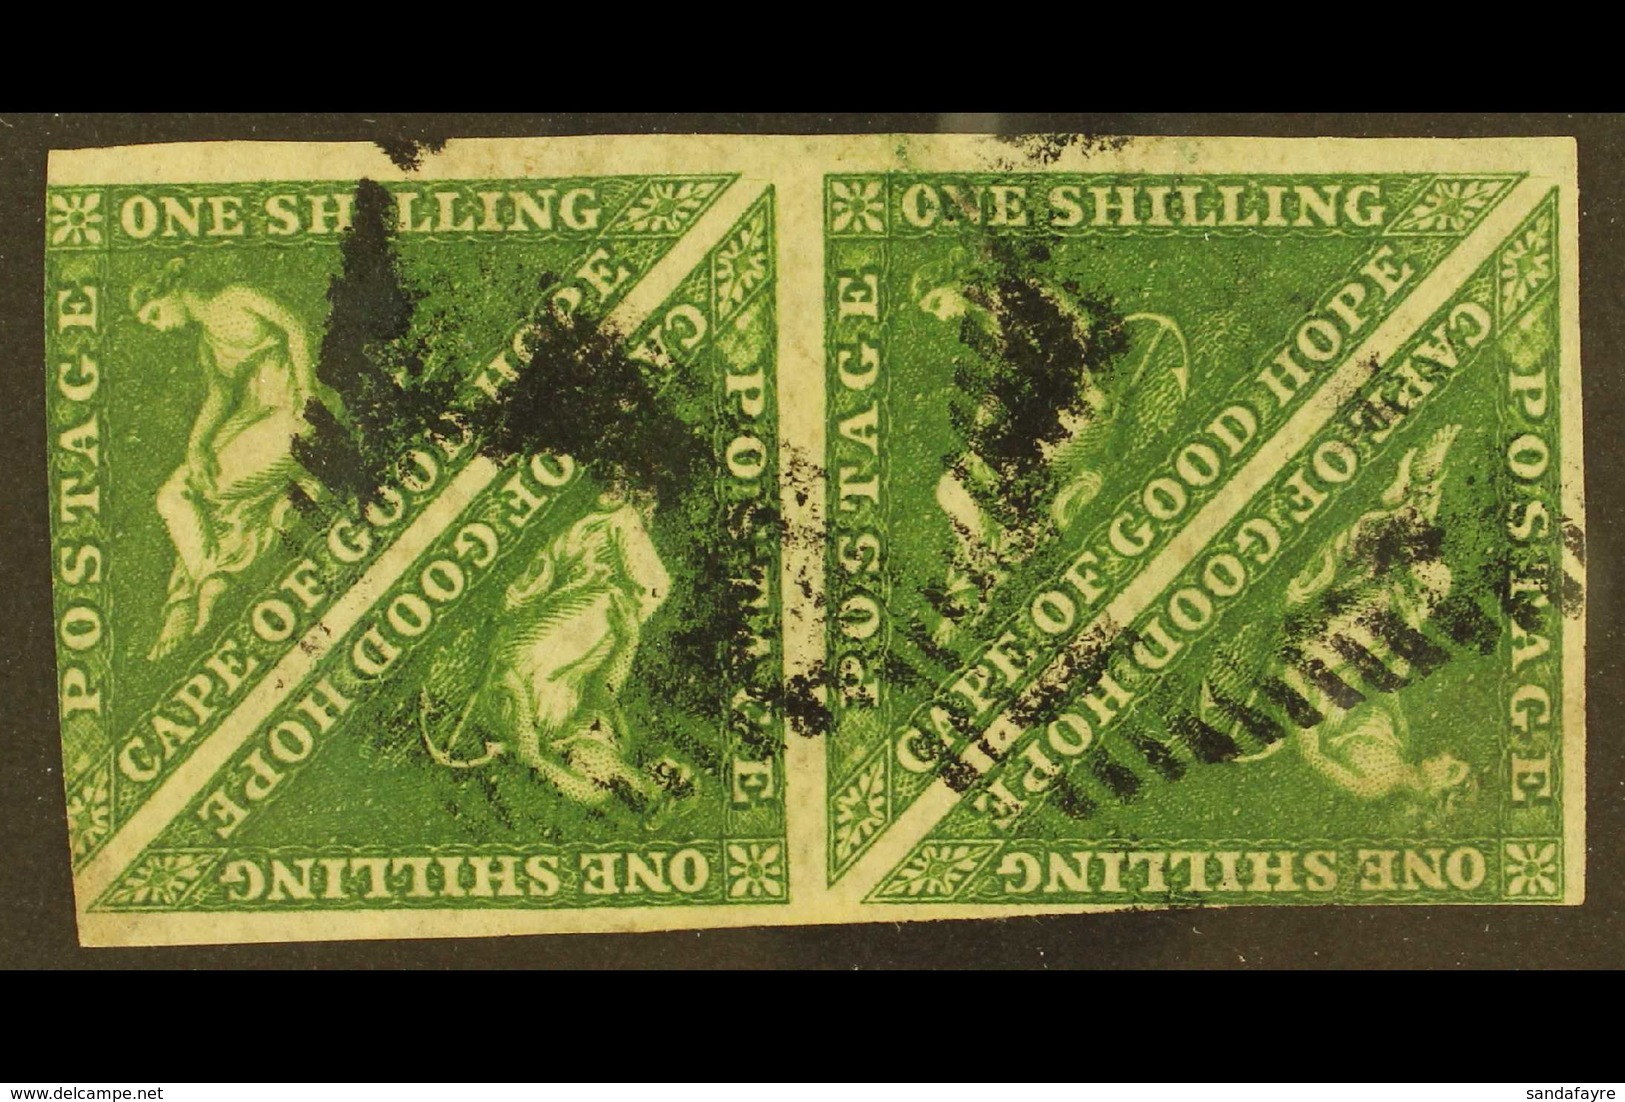 CAPE OF GOOD HOPE 1855 1s Bright Yellow Green, SG 8, Horizontal Block Of 4, Good To Fine Used, Just Clear At Lower Right - Unclassified